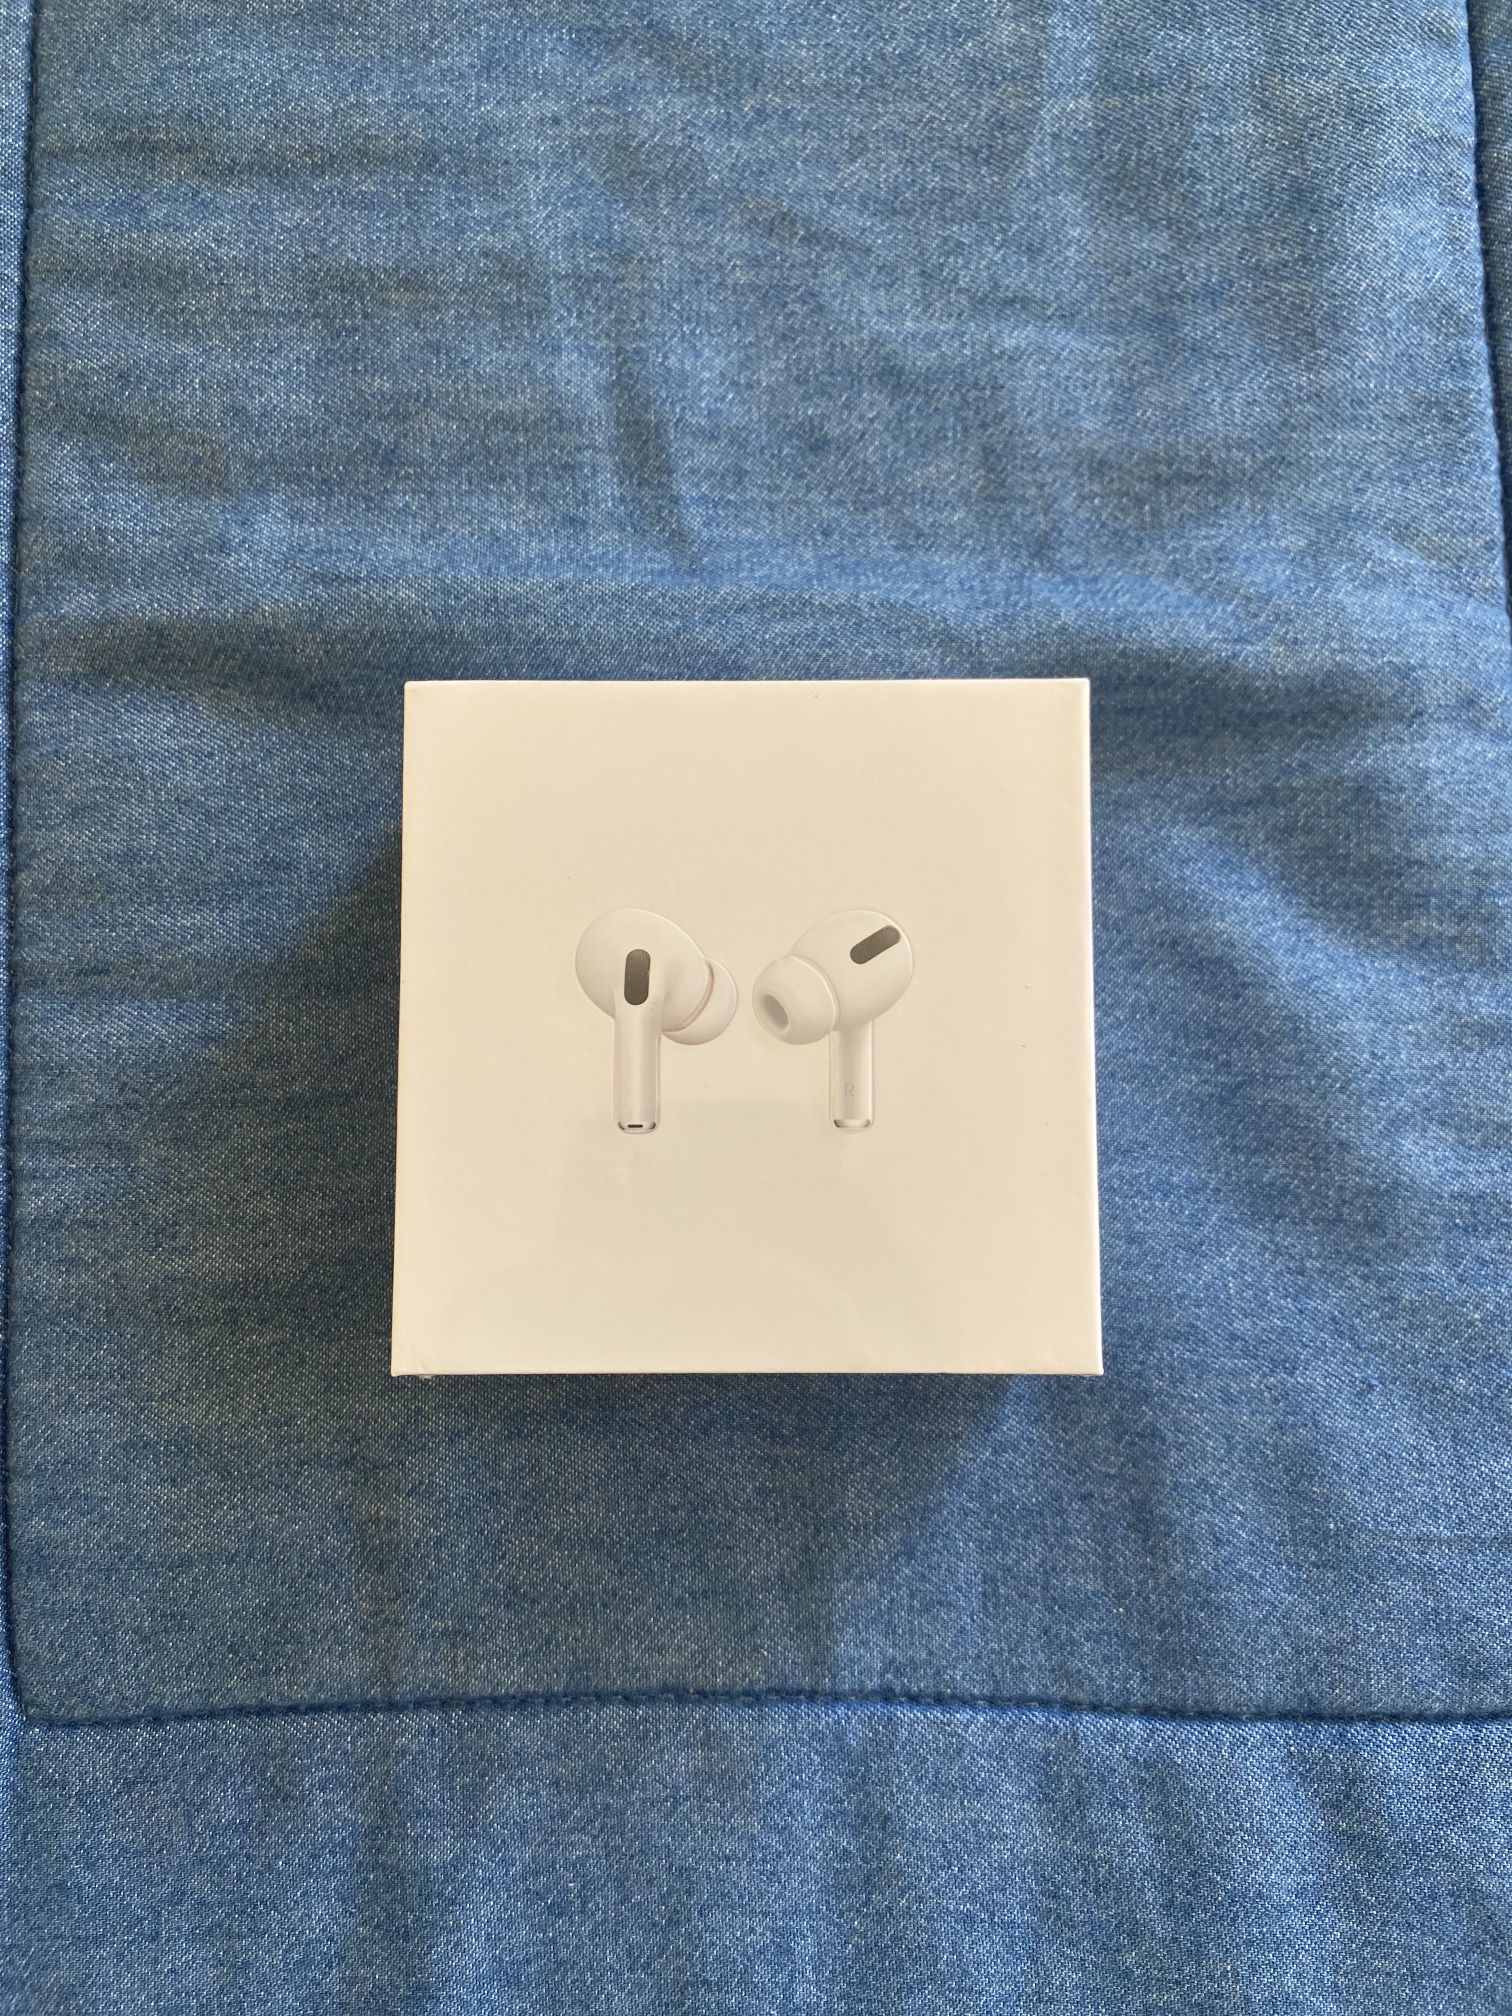 Brand New Sealed Airpods Pro!